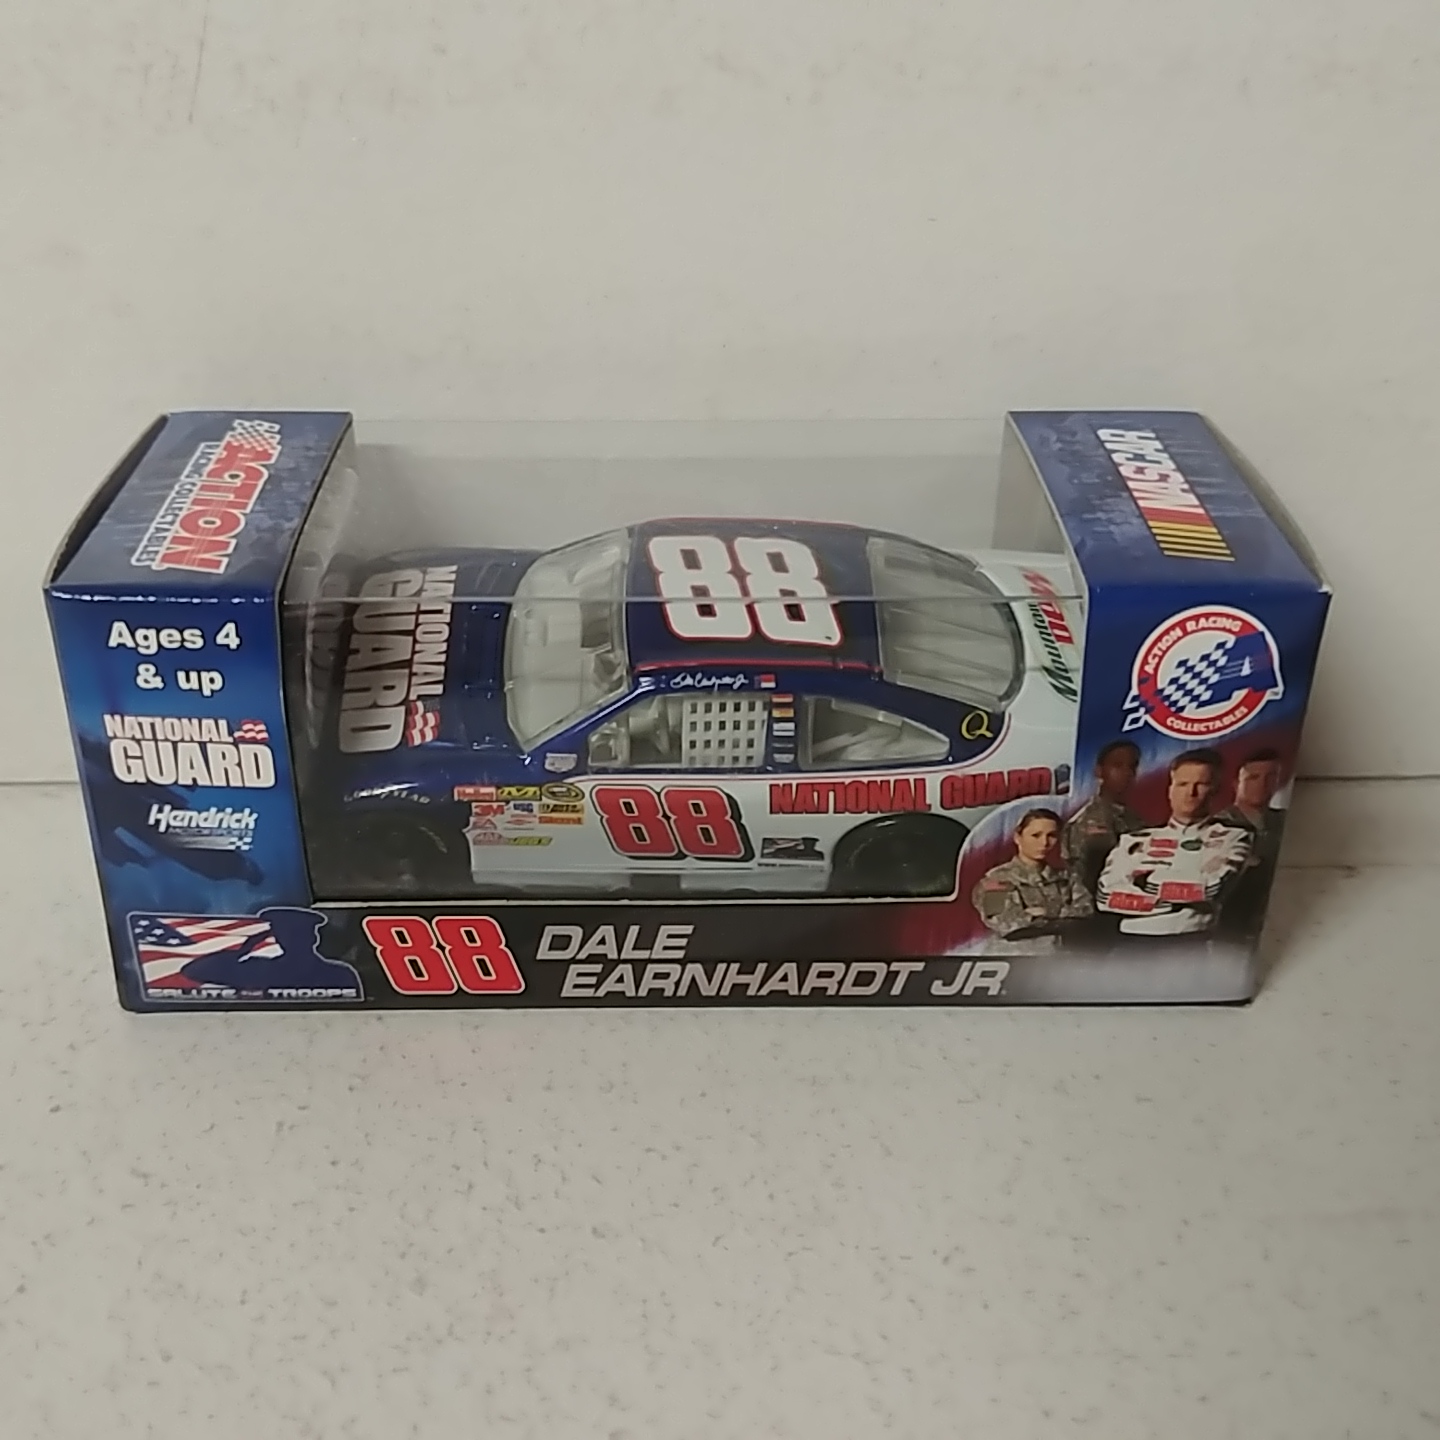 2008 Dale Earnhardt Jr 1/64th National Guard "Salute the Troops" Pitstop Series car